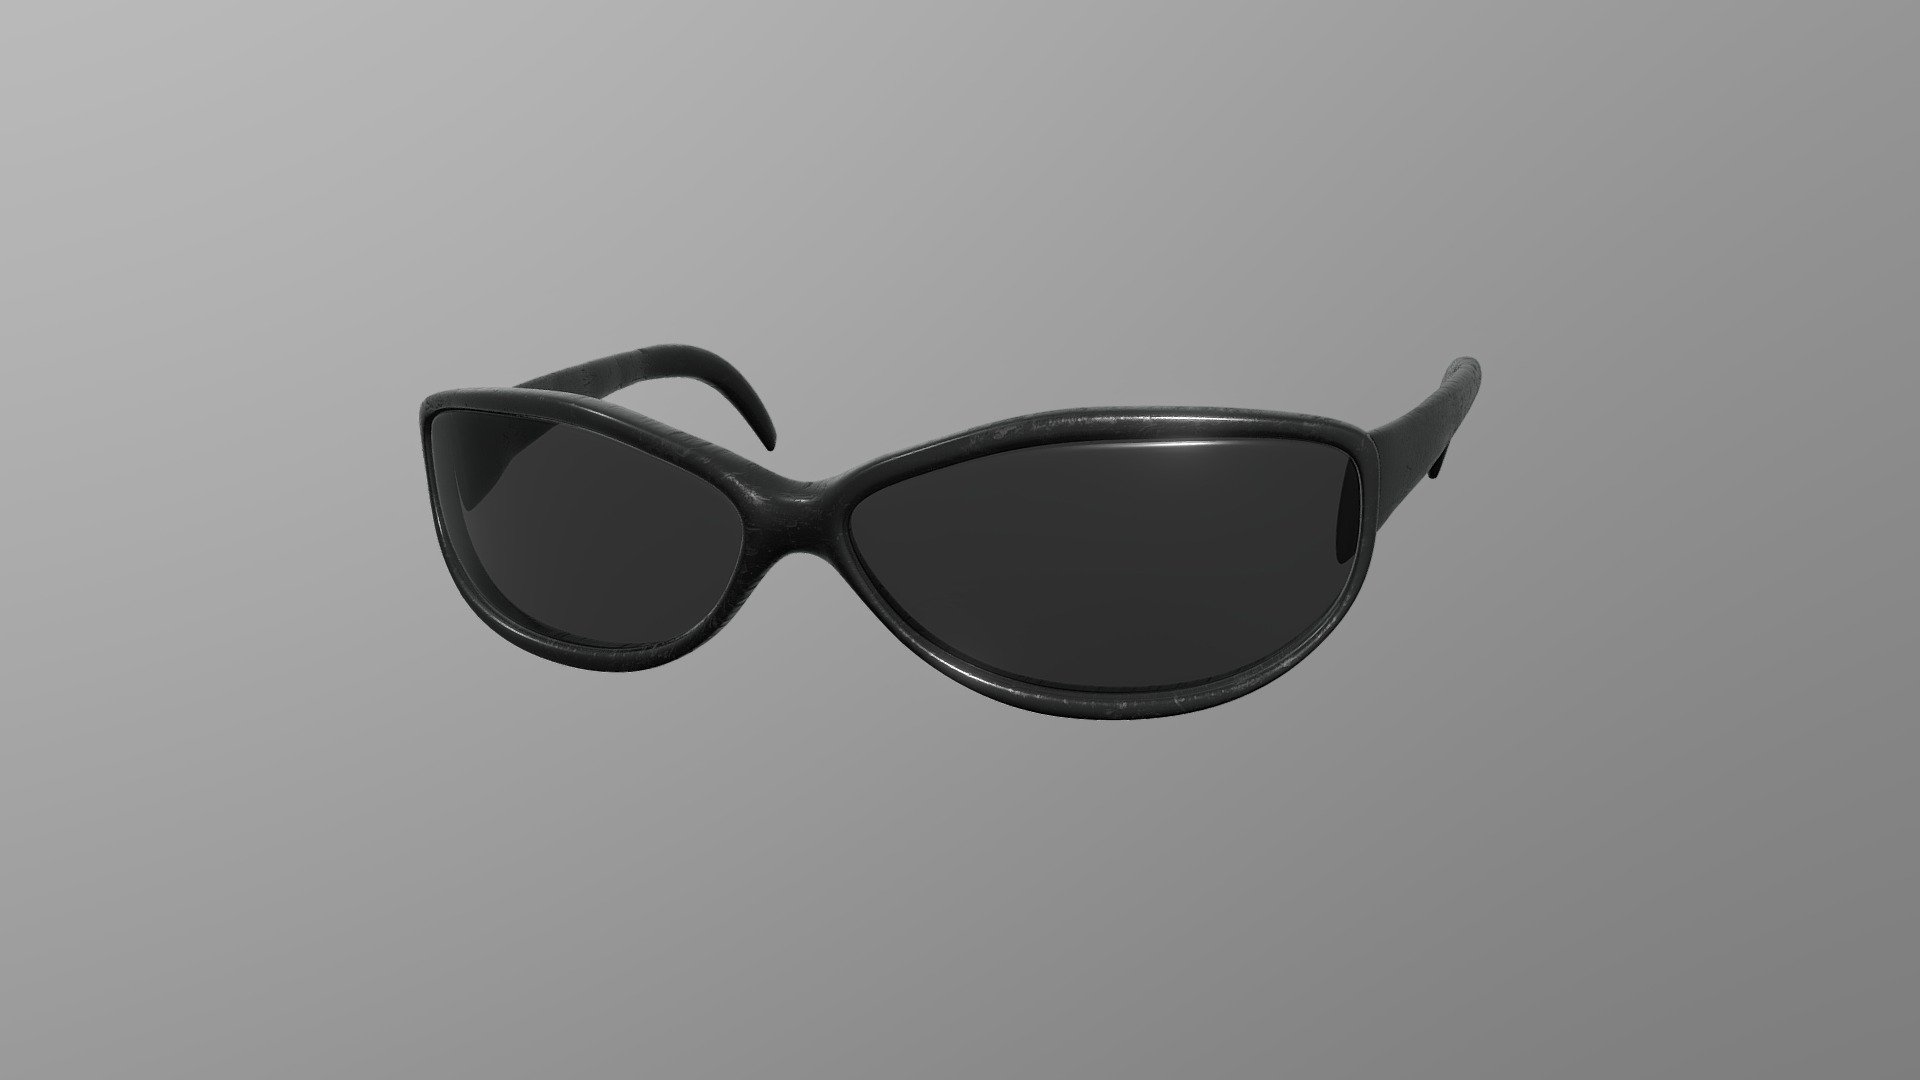 Wrap Sunglasses
Bring your project to life with this mid poly 3D model of Wrap Sunglasses. Perfect for use in games, animations, VR, AR, and more, this model is optimized for performance and still retains a high level of detail.


Features



Mid  poly design with 10,150 vertices

20,436 edges

10,290 faces (polygons)

20,516 tris

2k PBR Textures and materials

File formats included: .obj, .fbx, .dae, .stl


Tools Used
This Wrap Sunglasses mid poly 3D model was created using Blender 3.3.1, a popular and versatile 3D creation software.


Availability
This mid poly Wrap Sunglasses 3D model is ready for use and available for purchase. Bring your project to the next level with this high-quality and optimized model 3d model